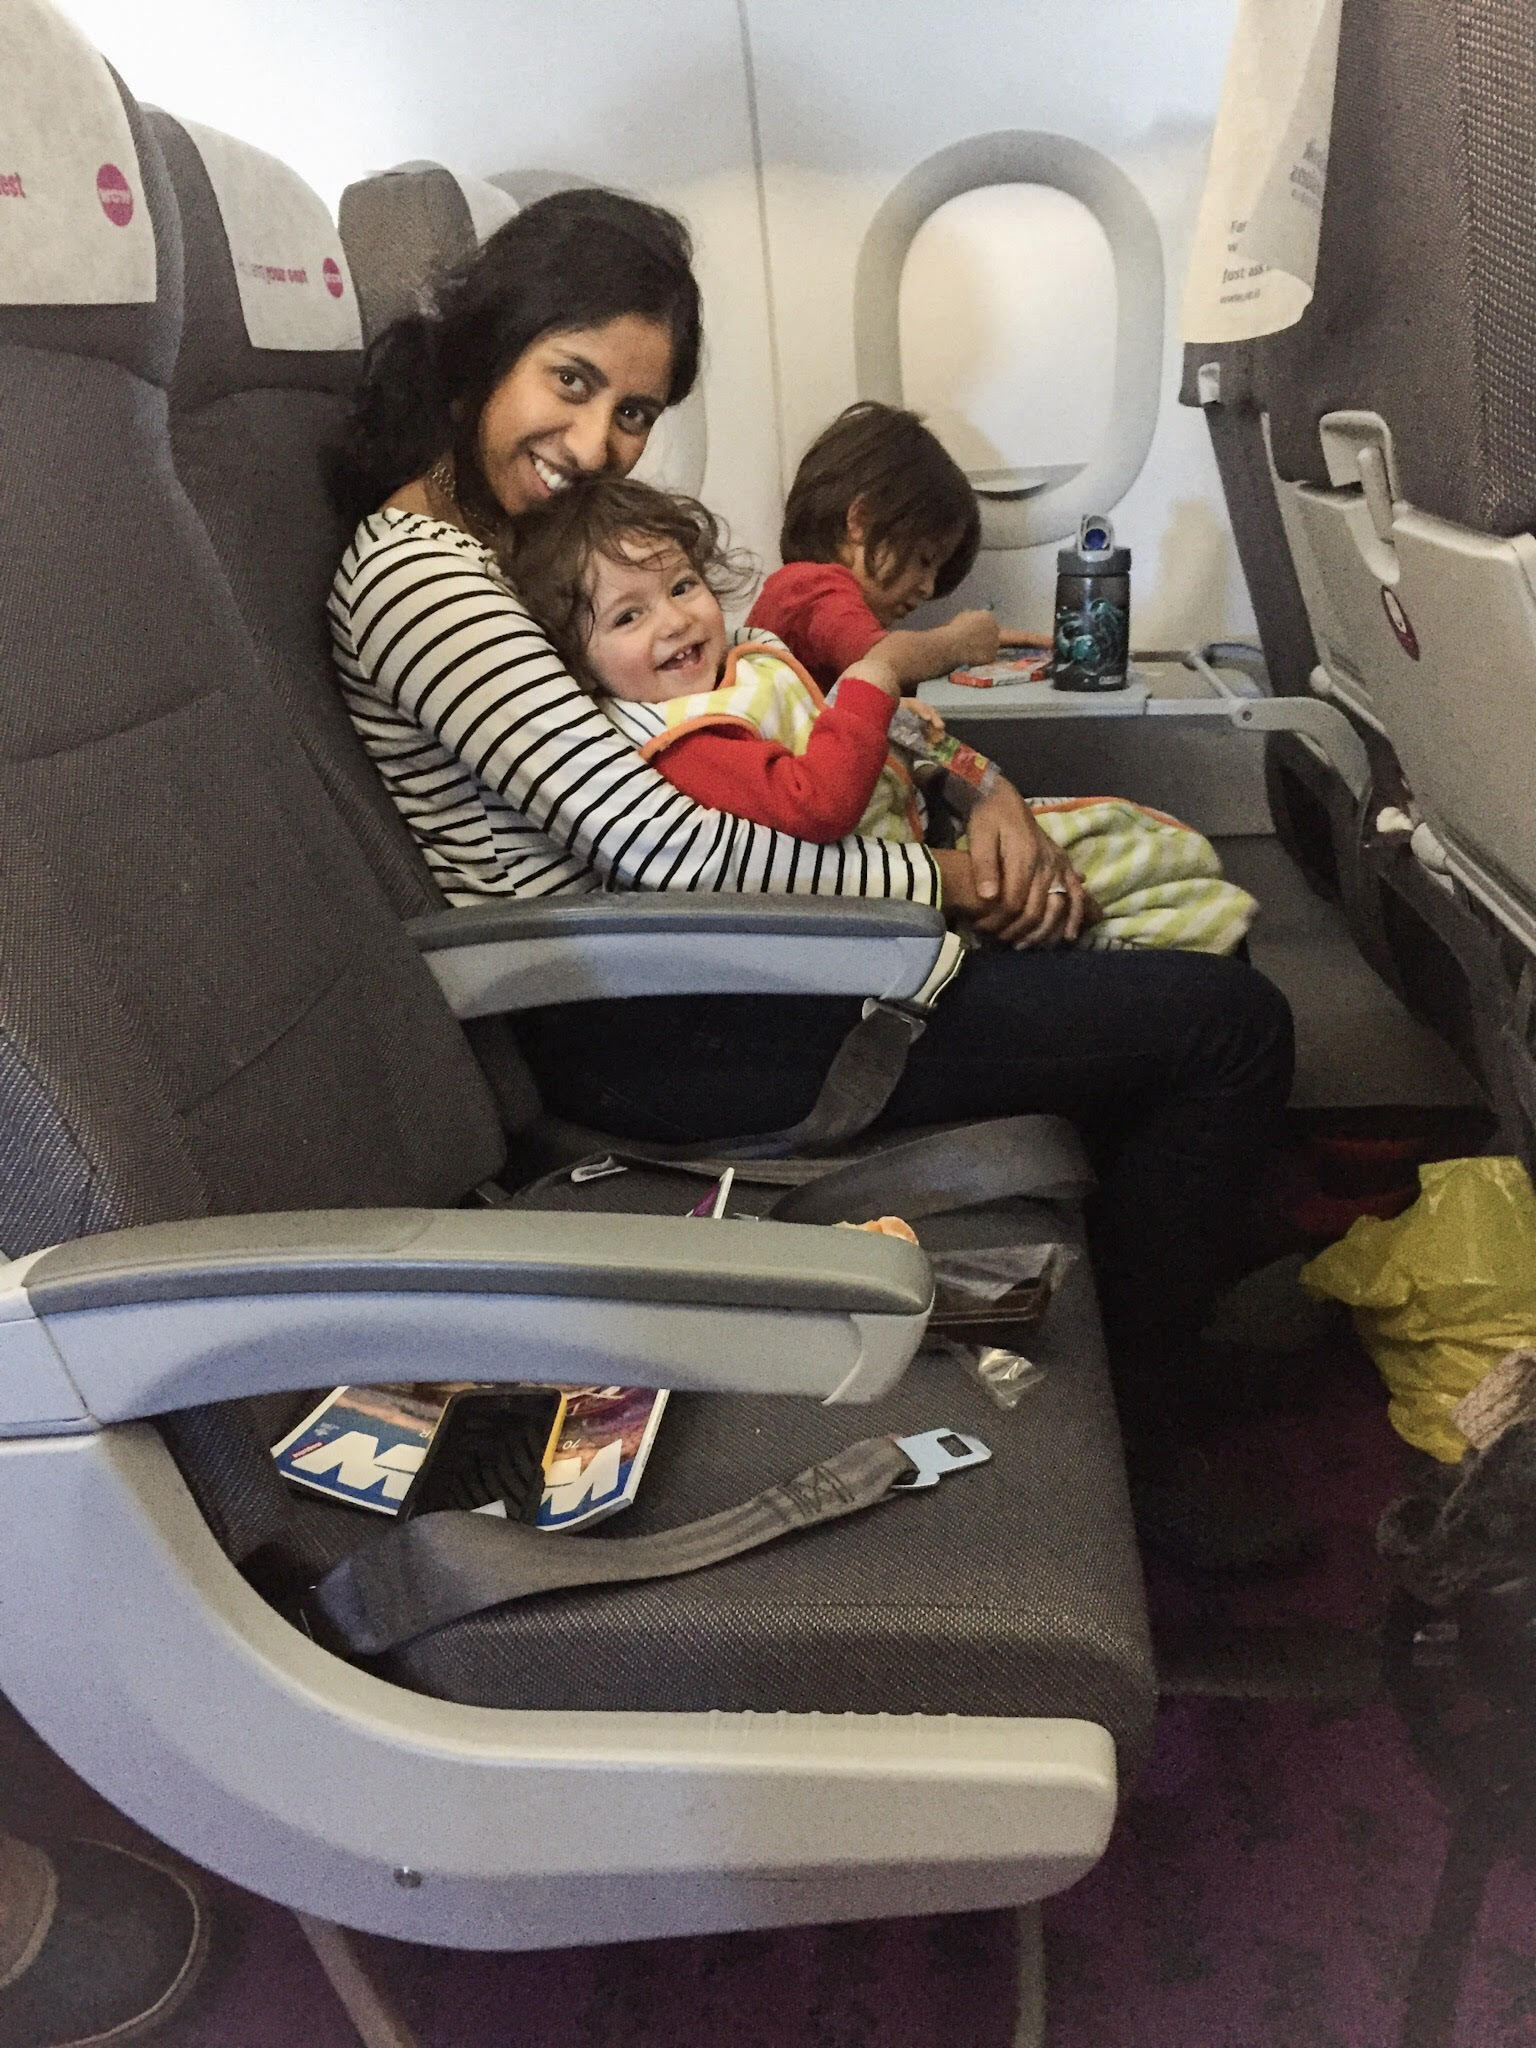 lap infant check in carseat with airline